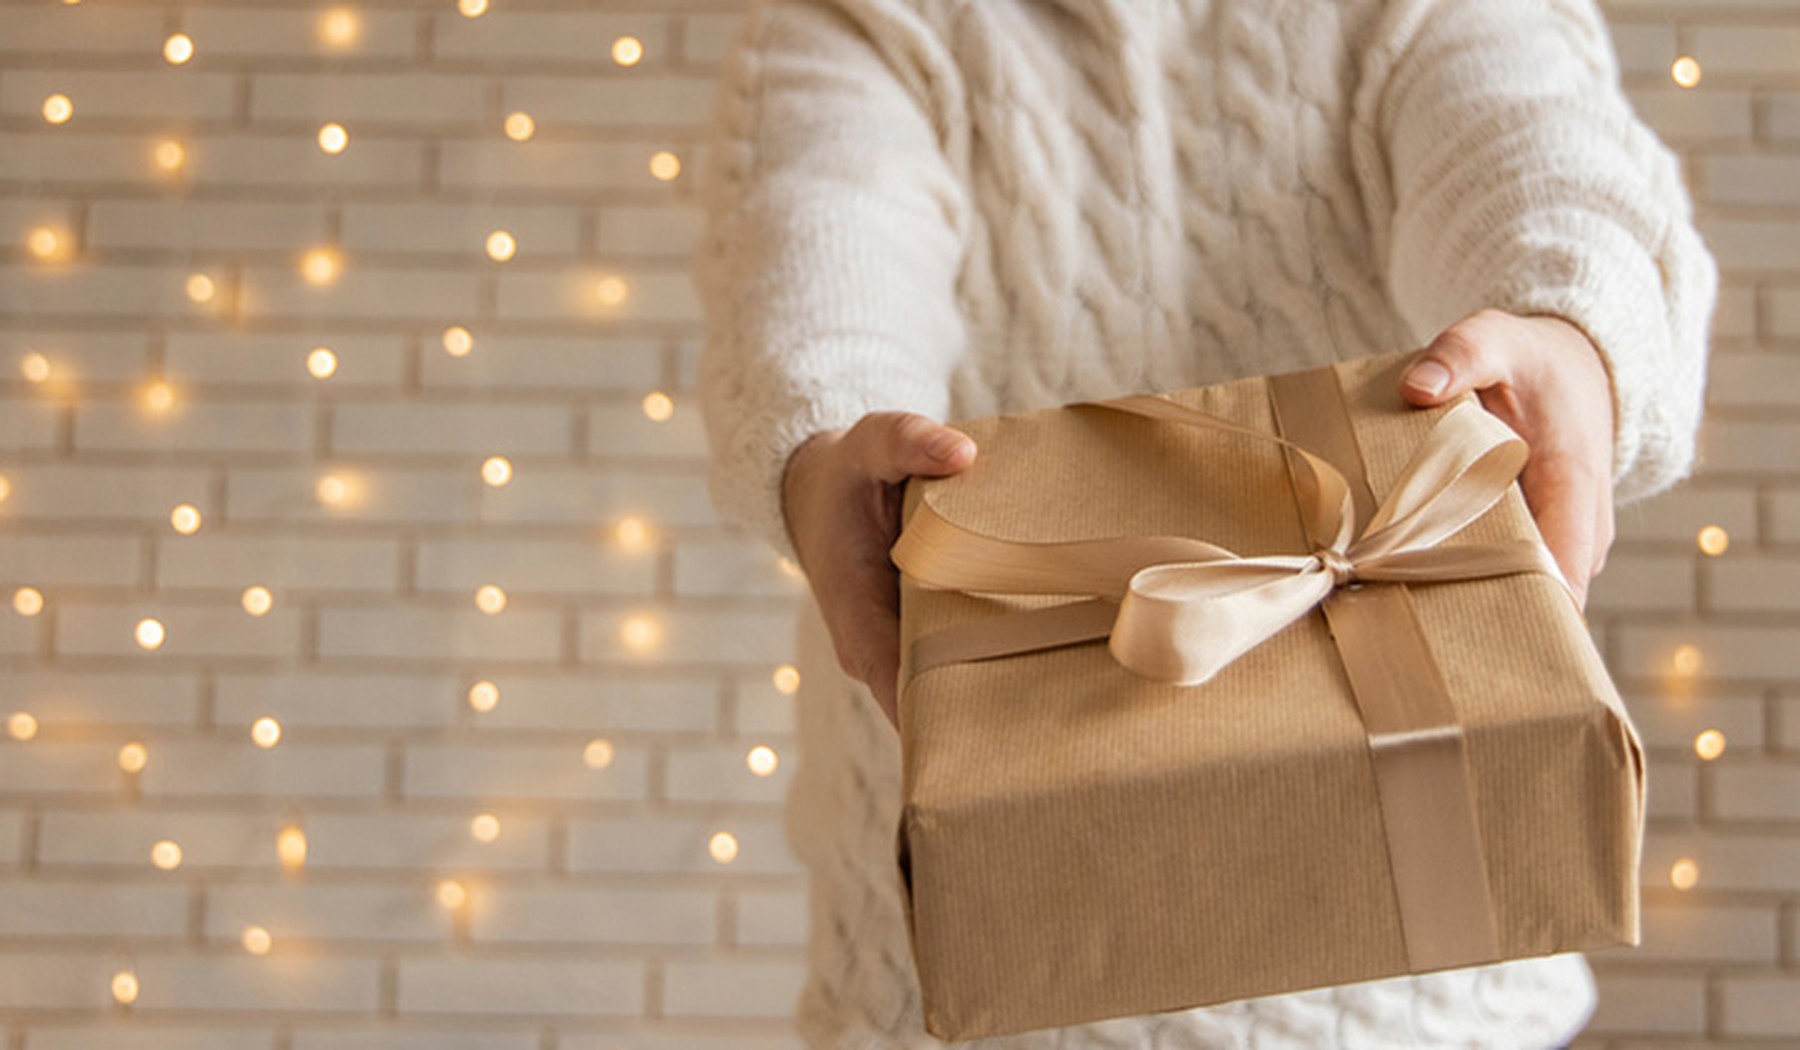 Person holding wrapped holiday gift in front of white lights